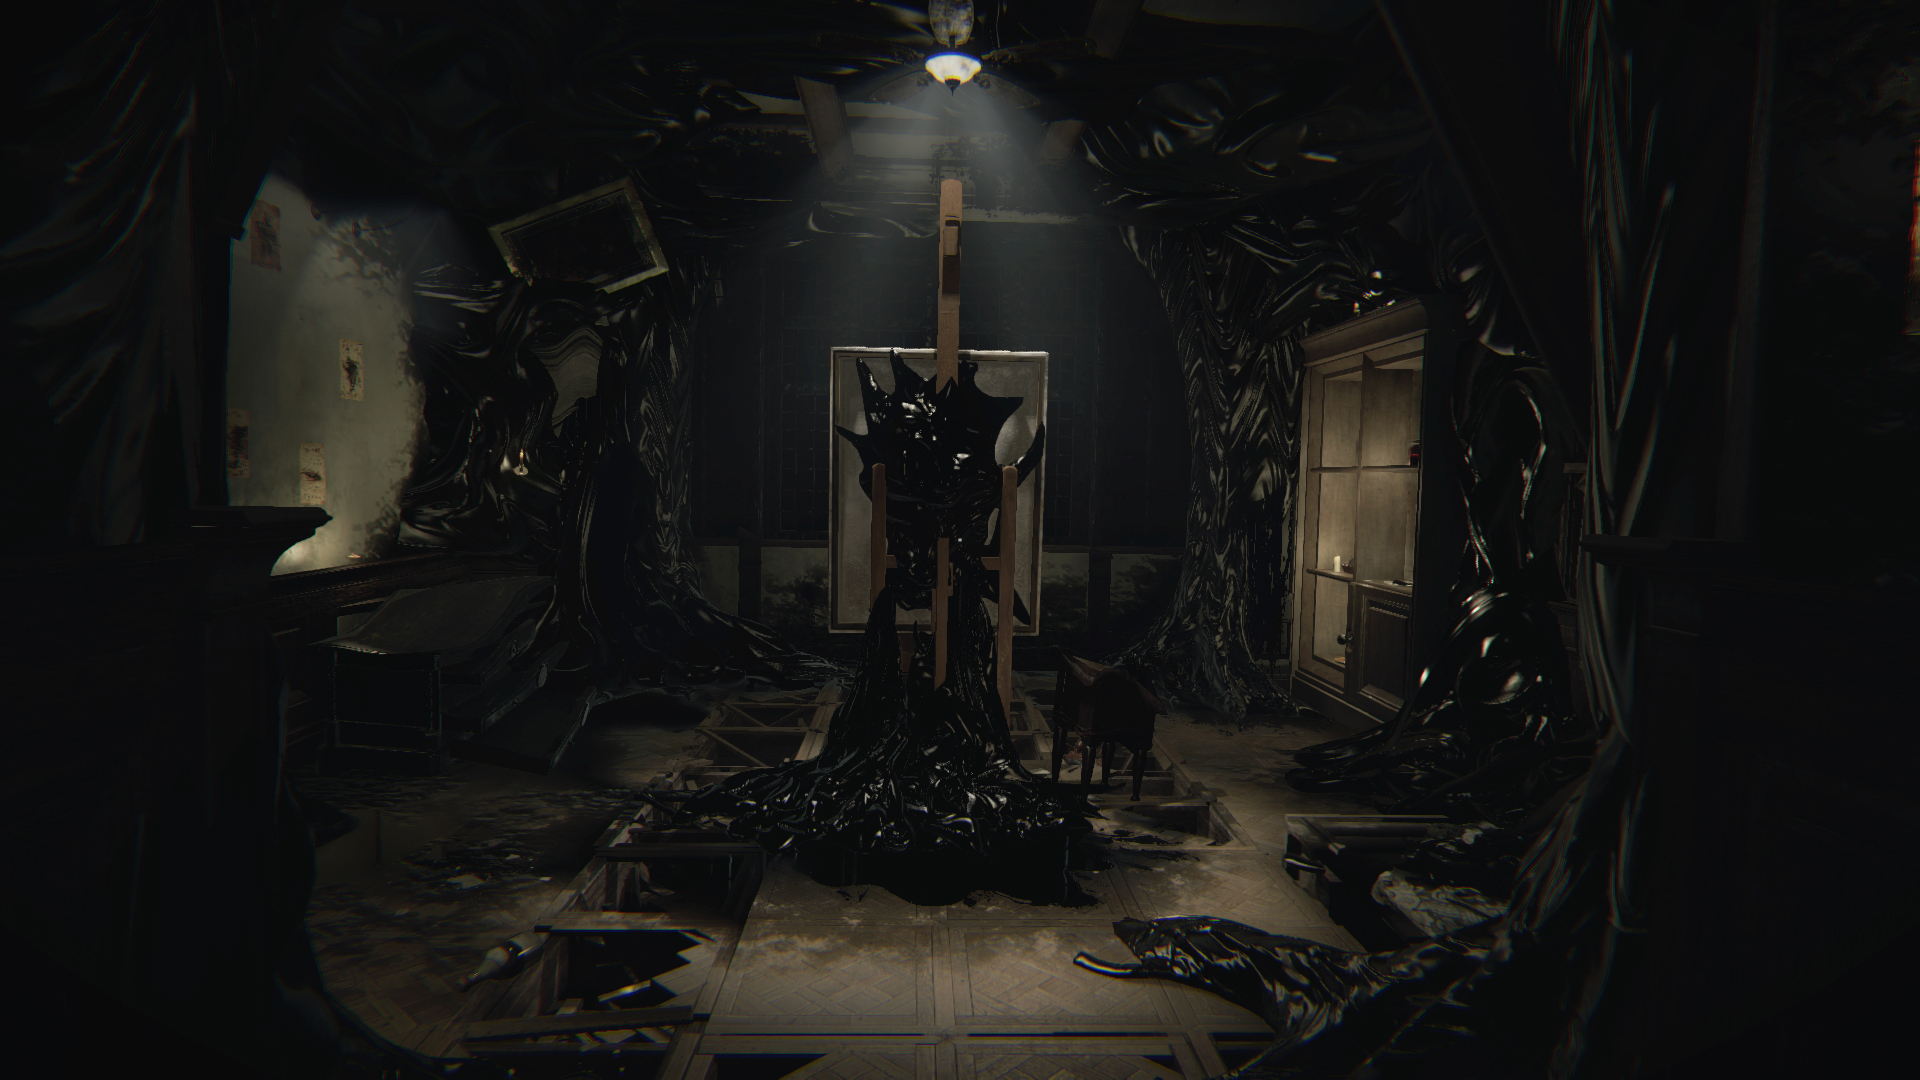 Layers Of Fear Is A Splendid Haunted House Devoid Chills Time